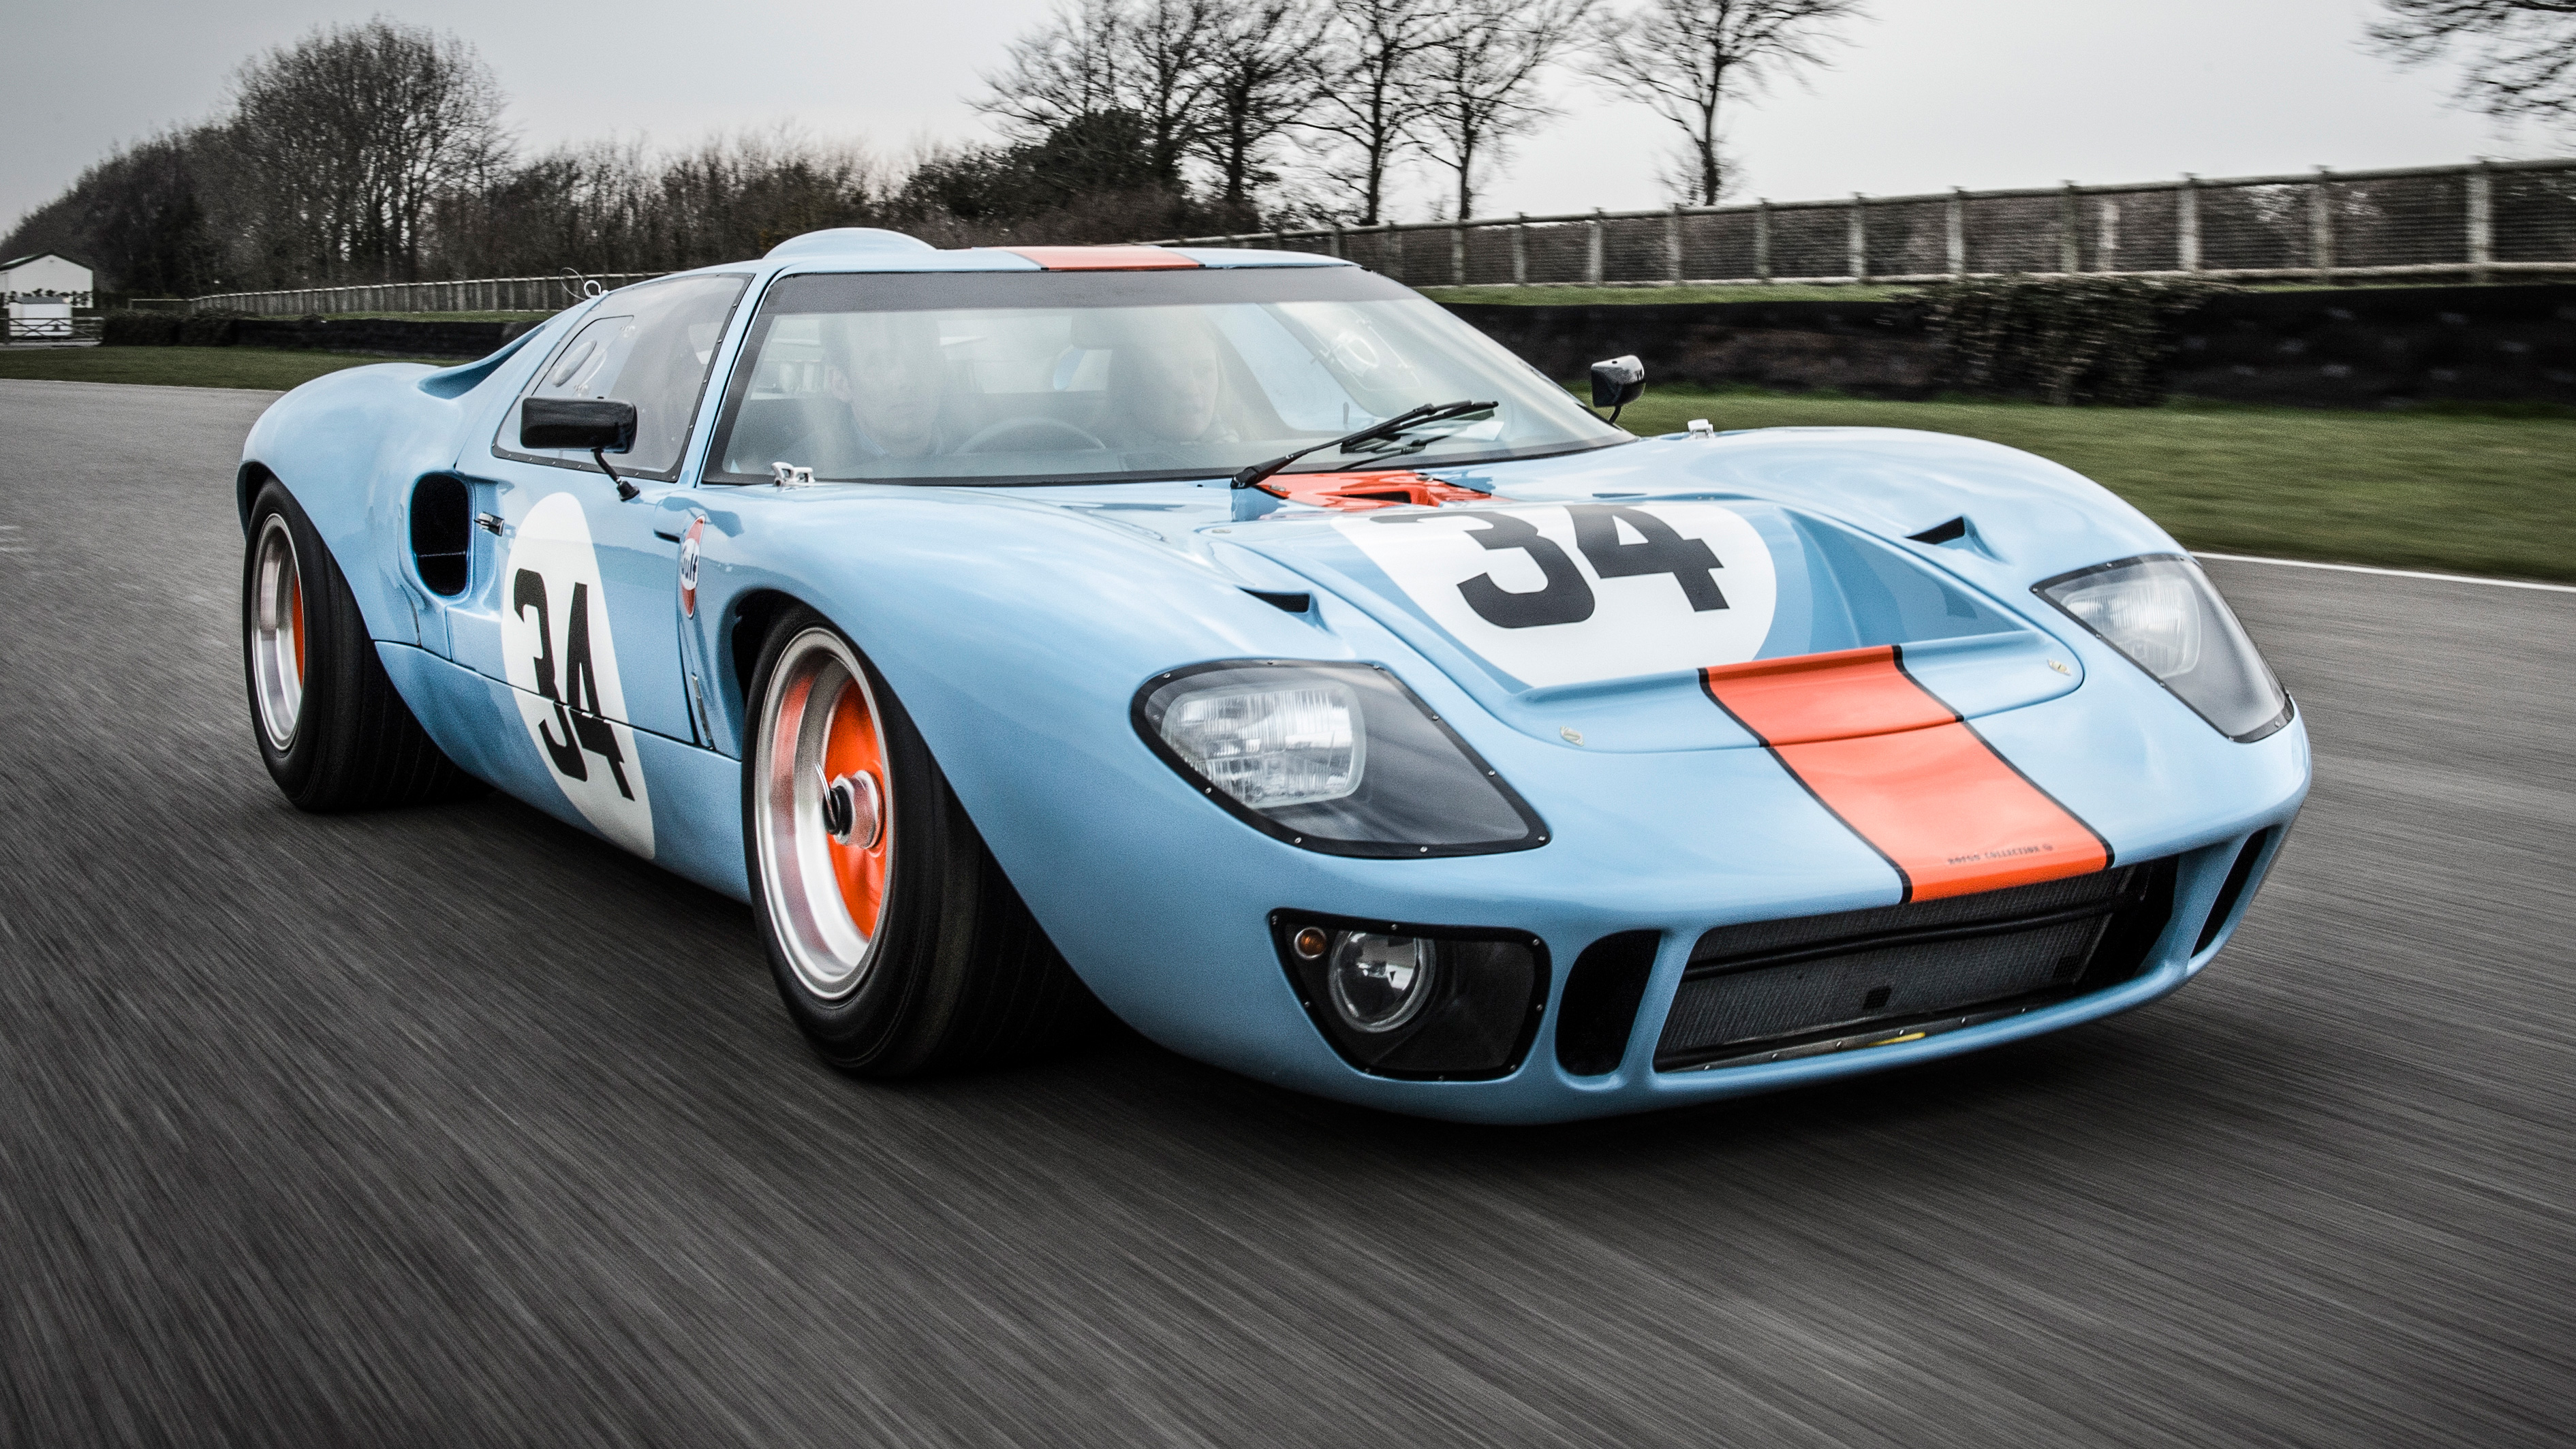 Here's the real story behind the Le Mans-winning Ford GT40 | Top Gear